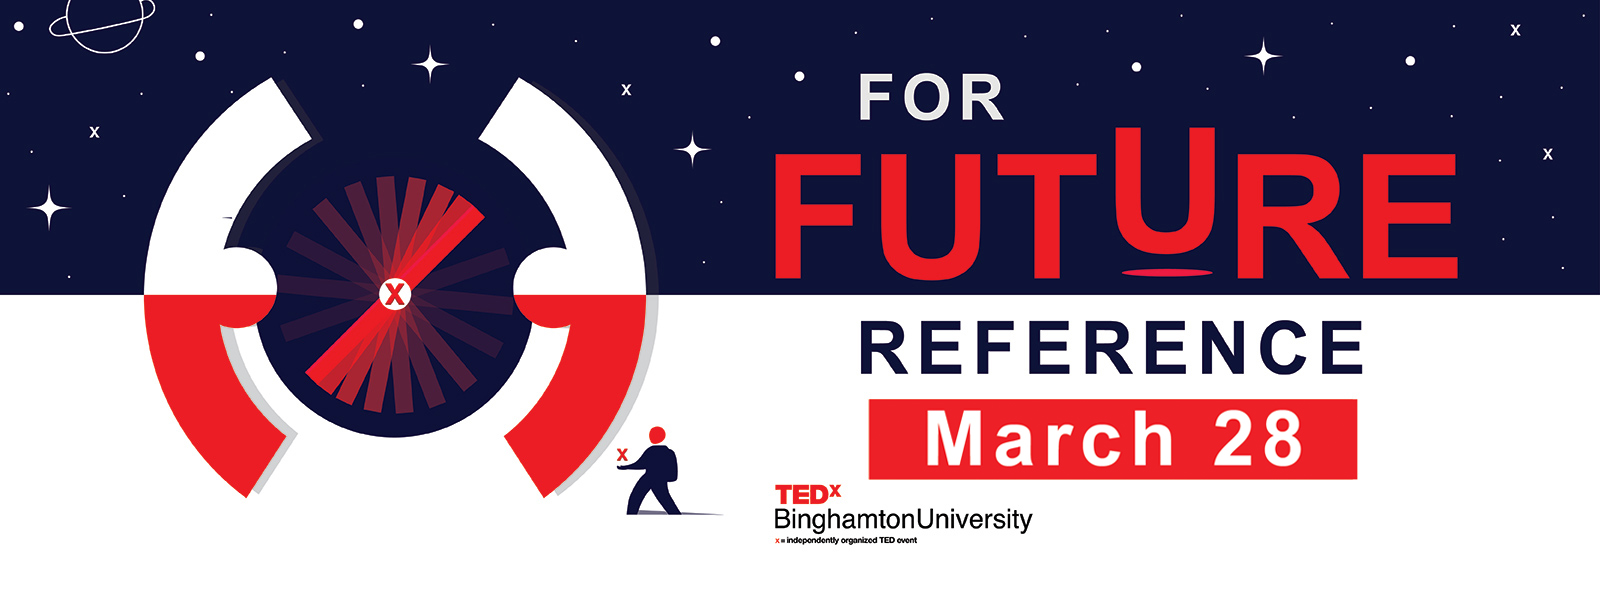 tedx binghamton 2021 For Future Reference